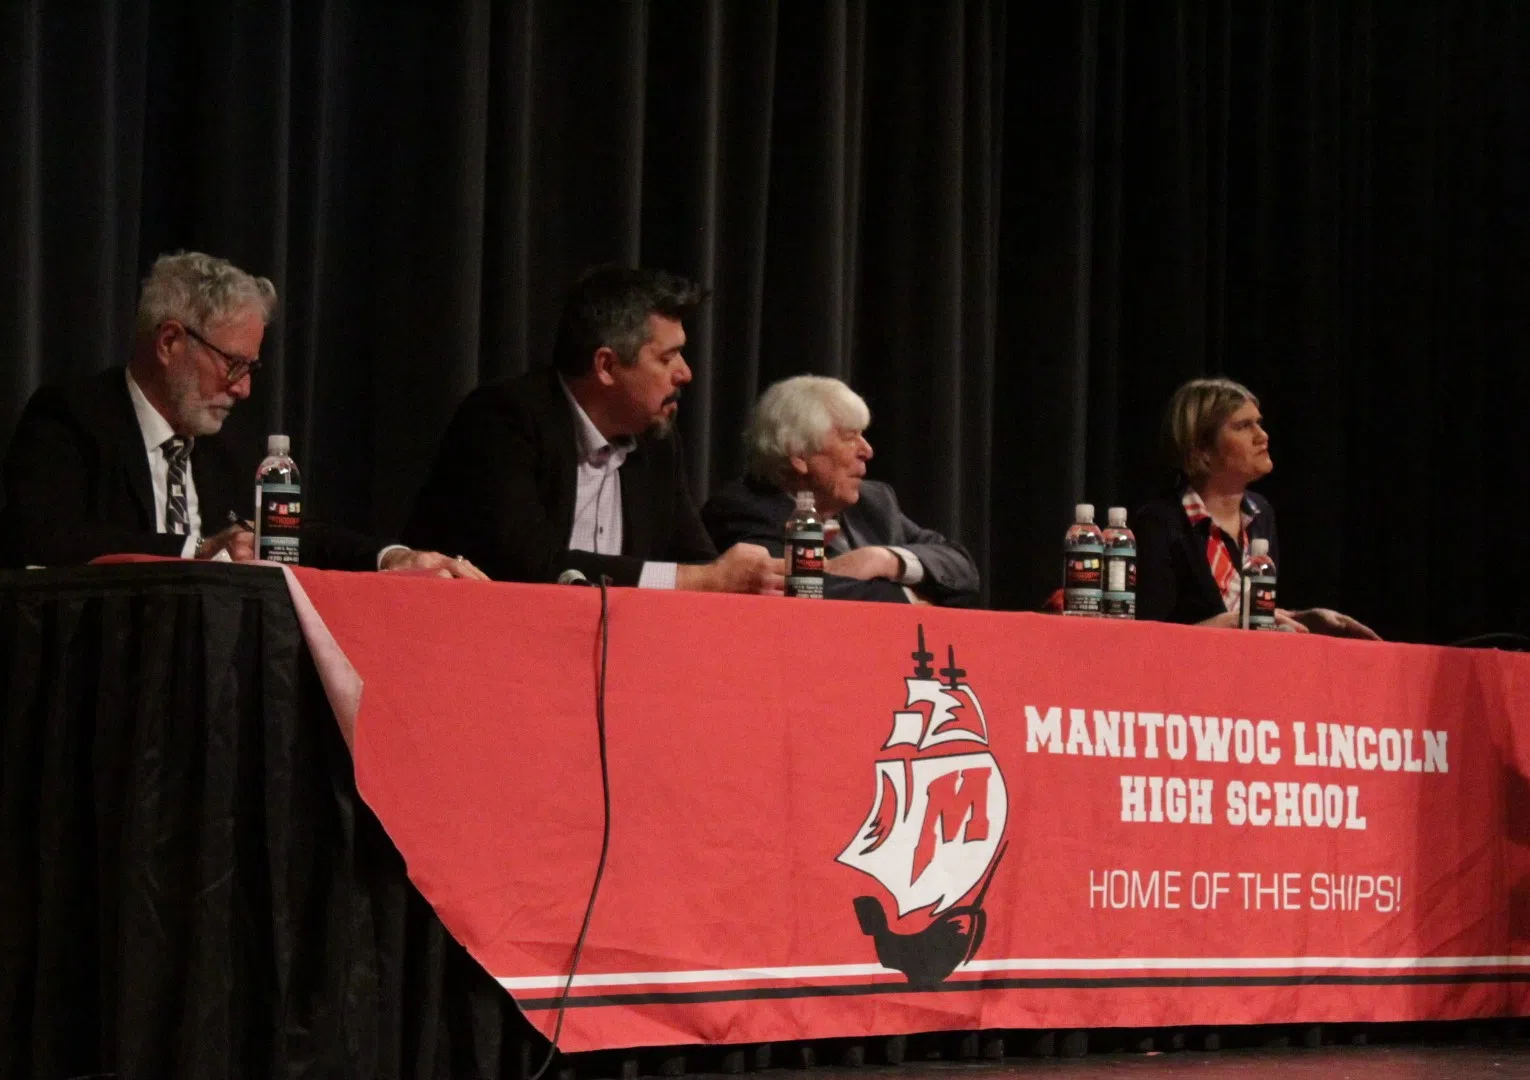 Questions Arise Regarding the Actions of One of the Four Candidates for the MPSD Board of Education